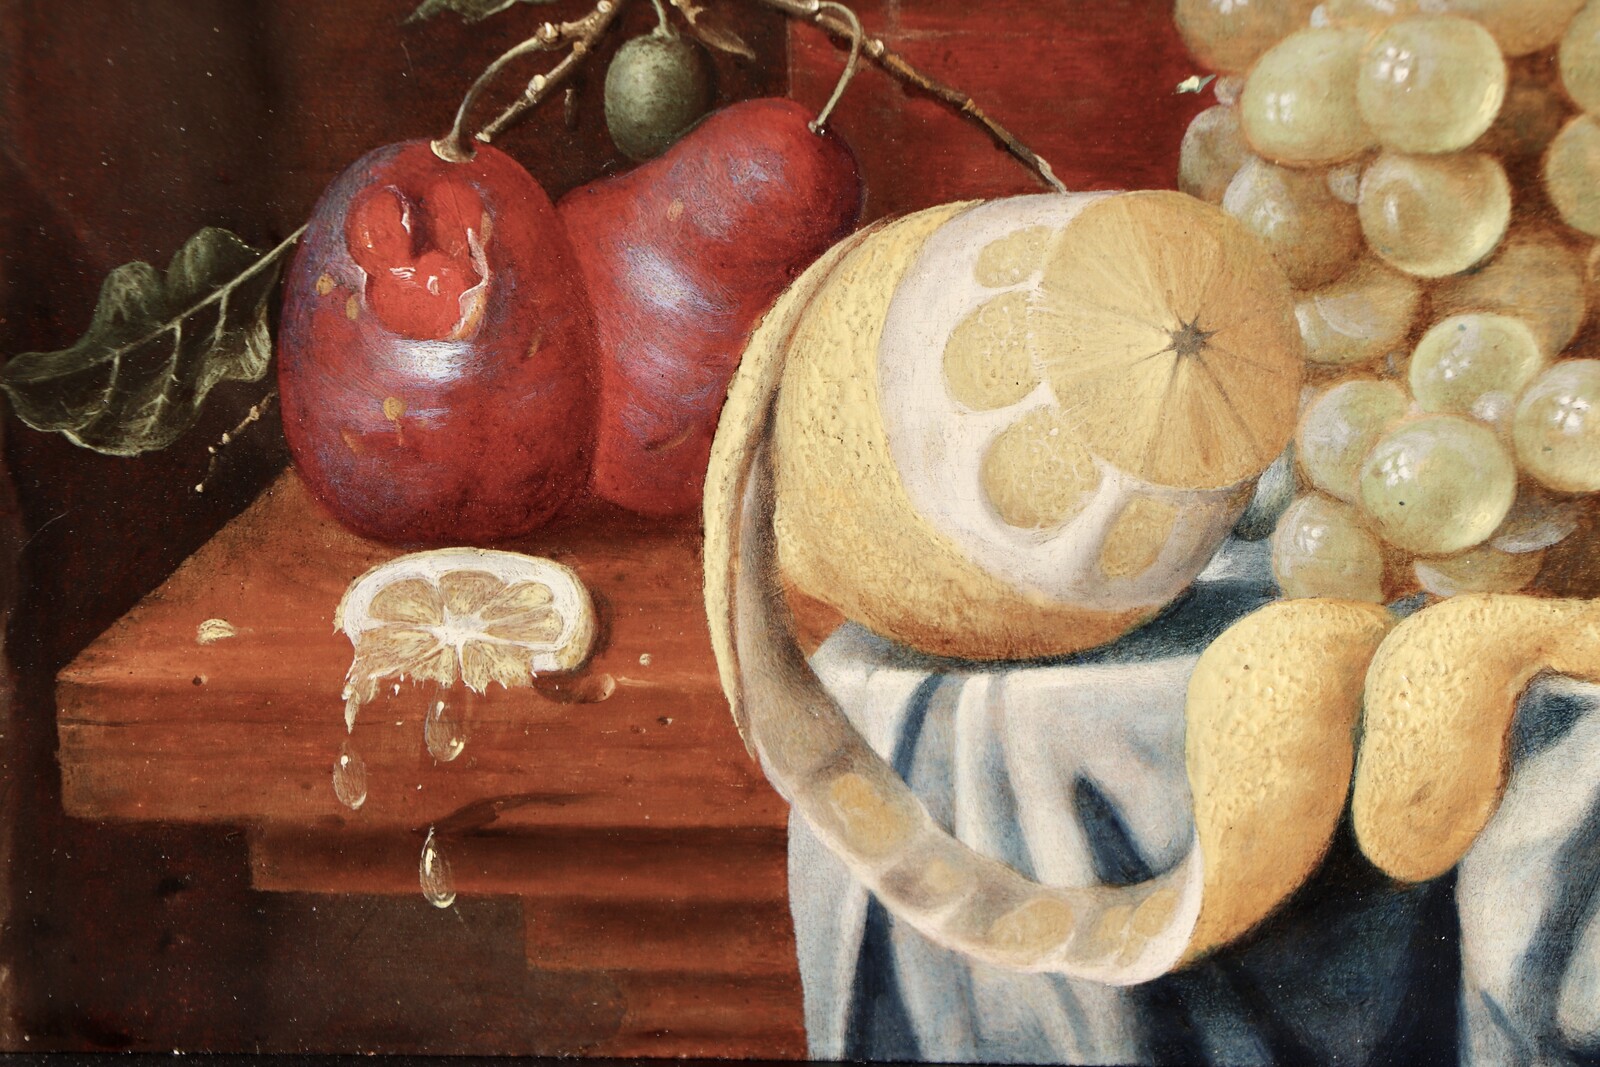 Fruit still life on a partly draped table